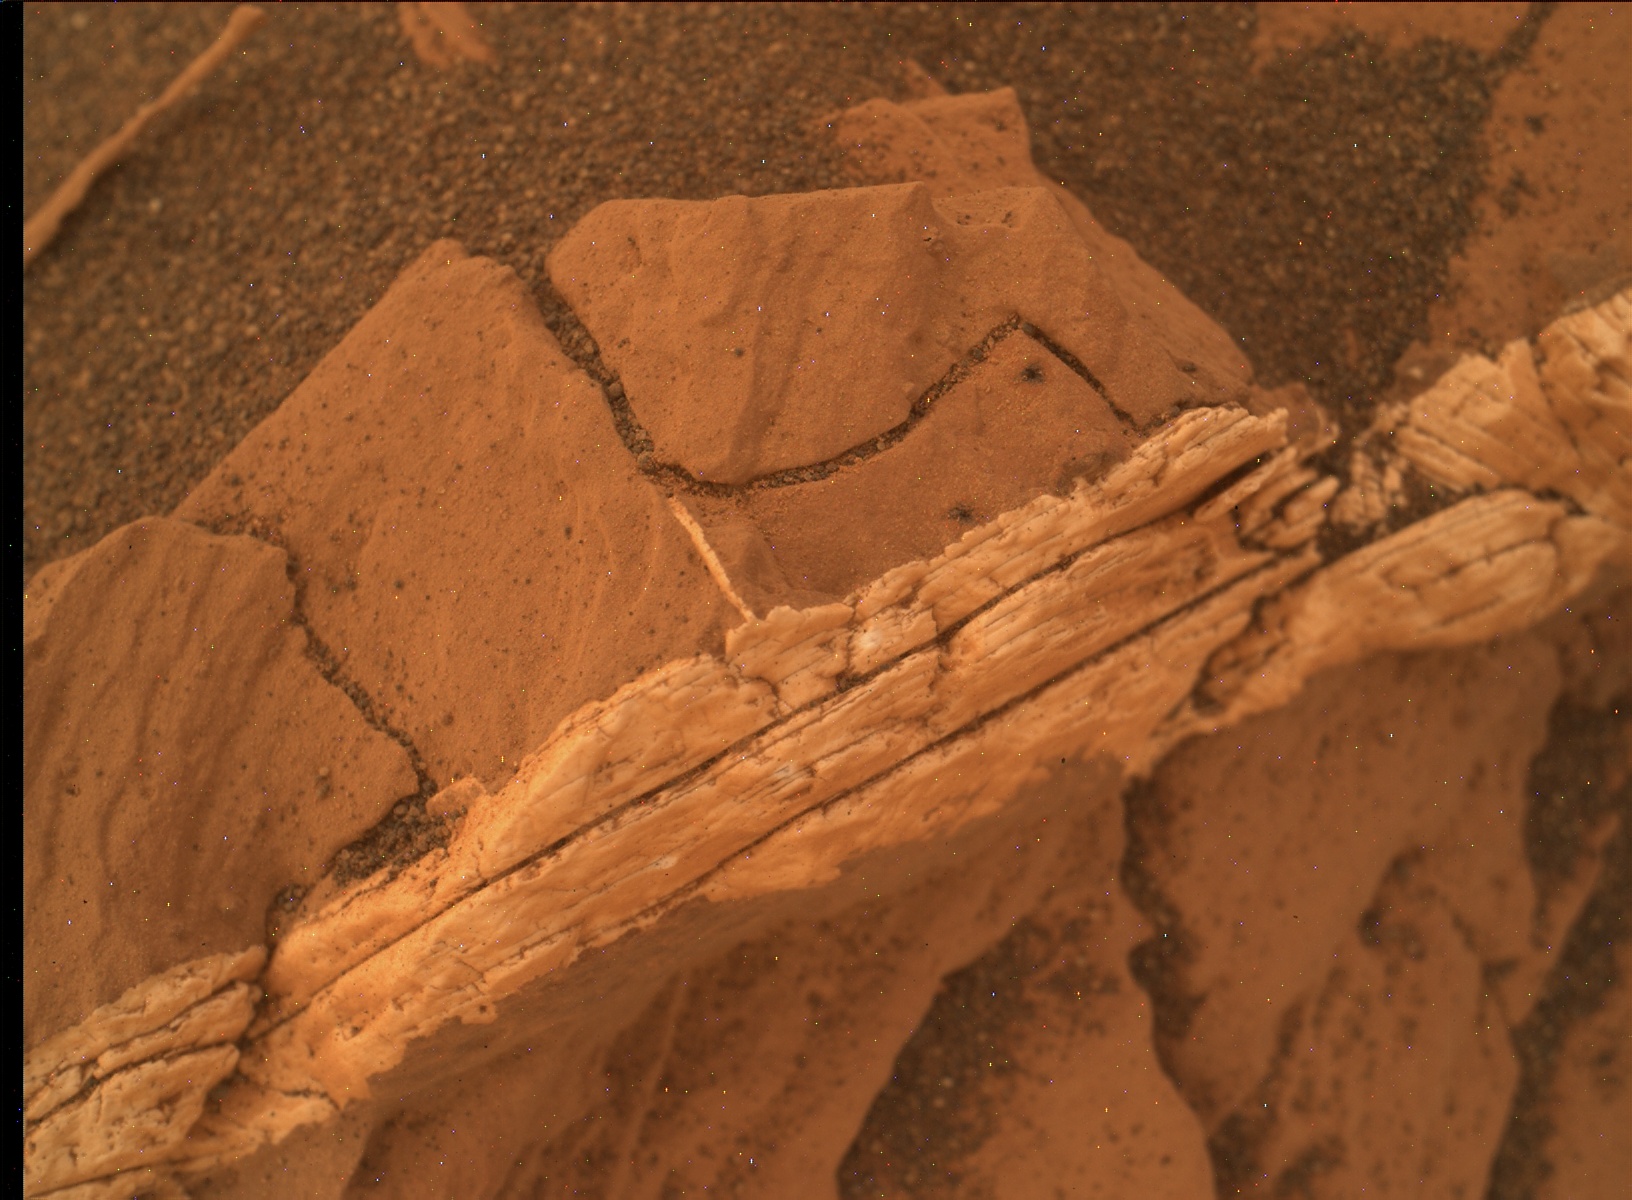 Nasa's Mars rover Curiosity acquired this image using its Mars Hand Lens Imager (MAHLI) on Sol 2083